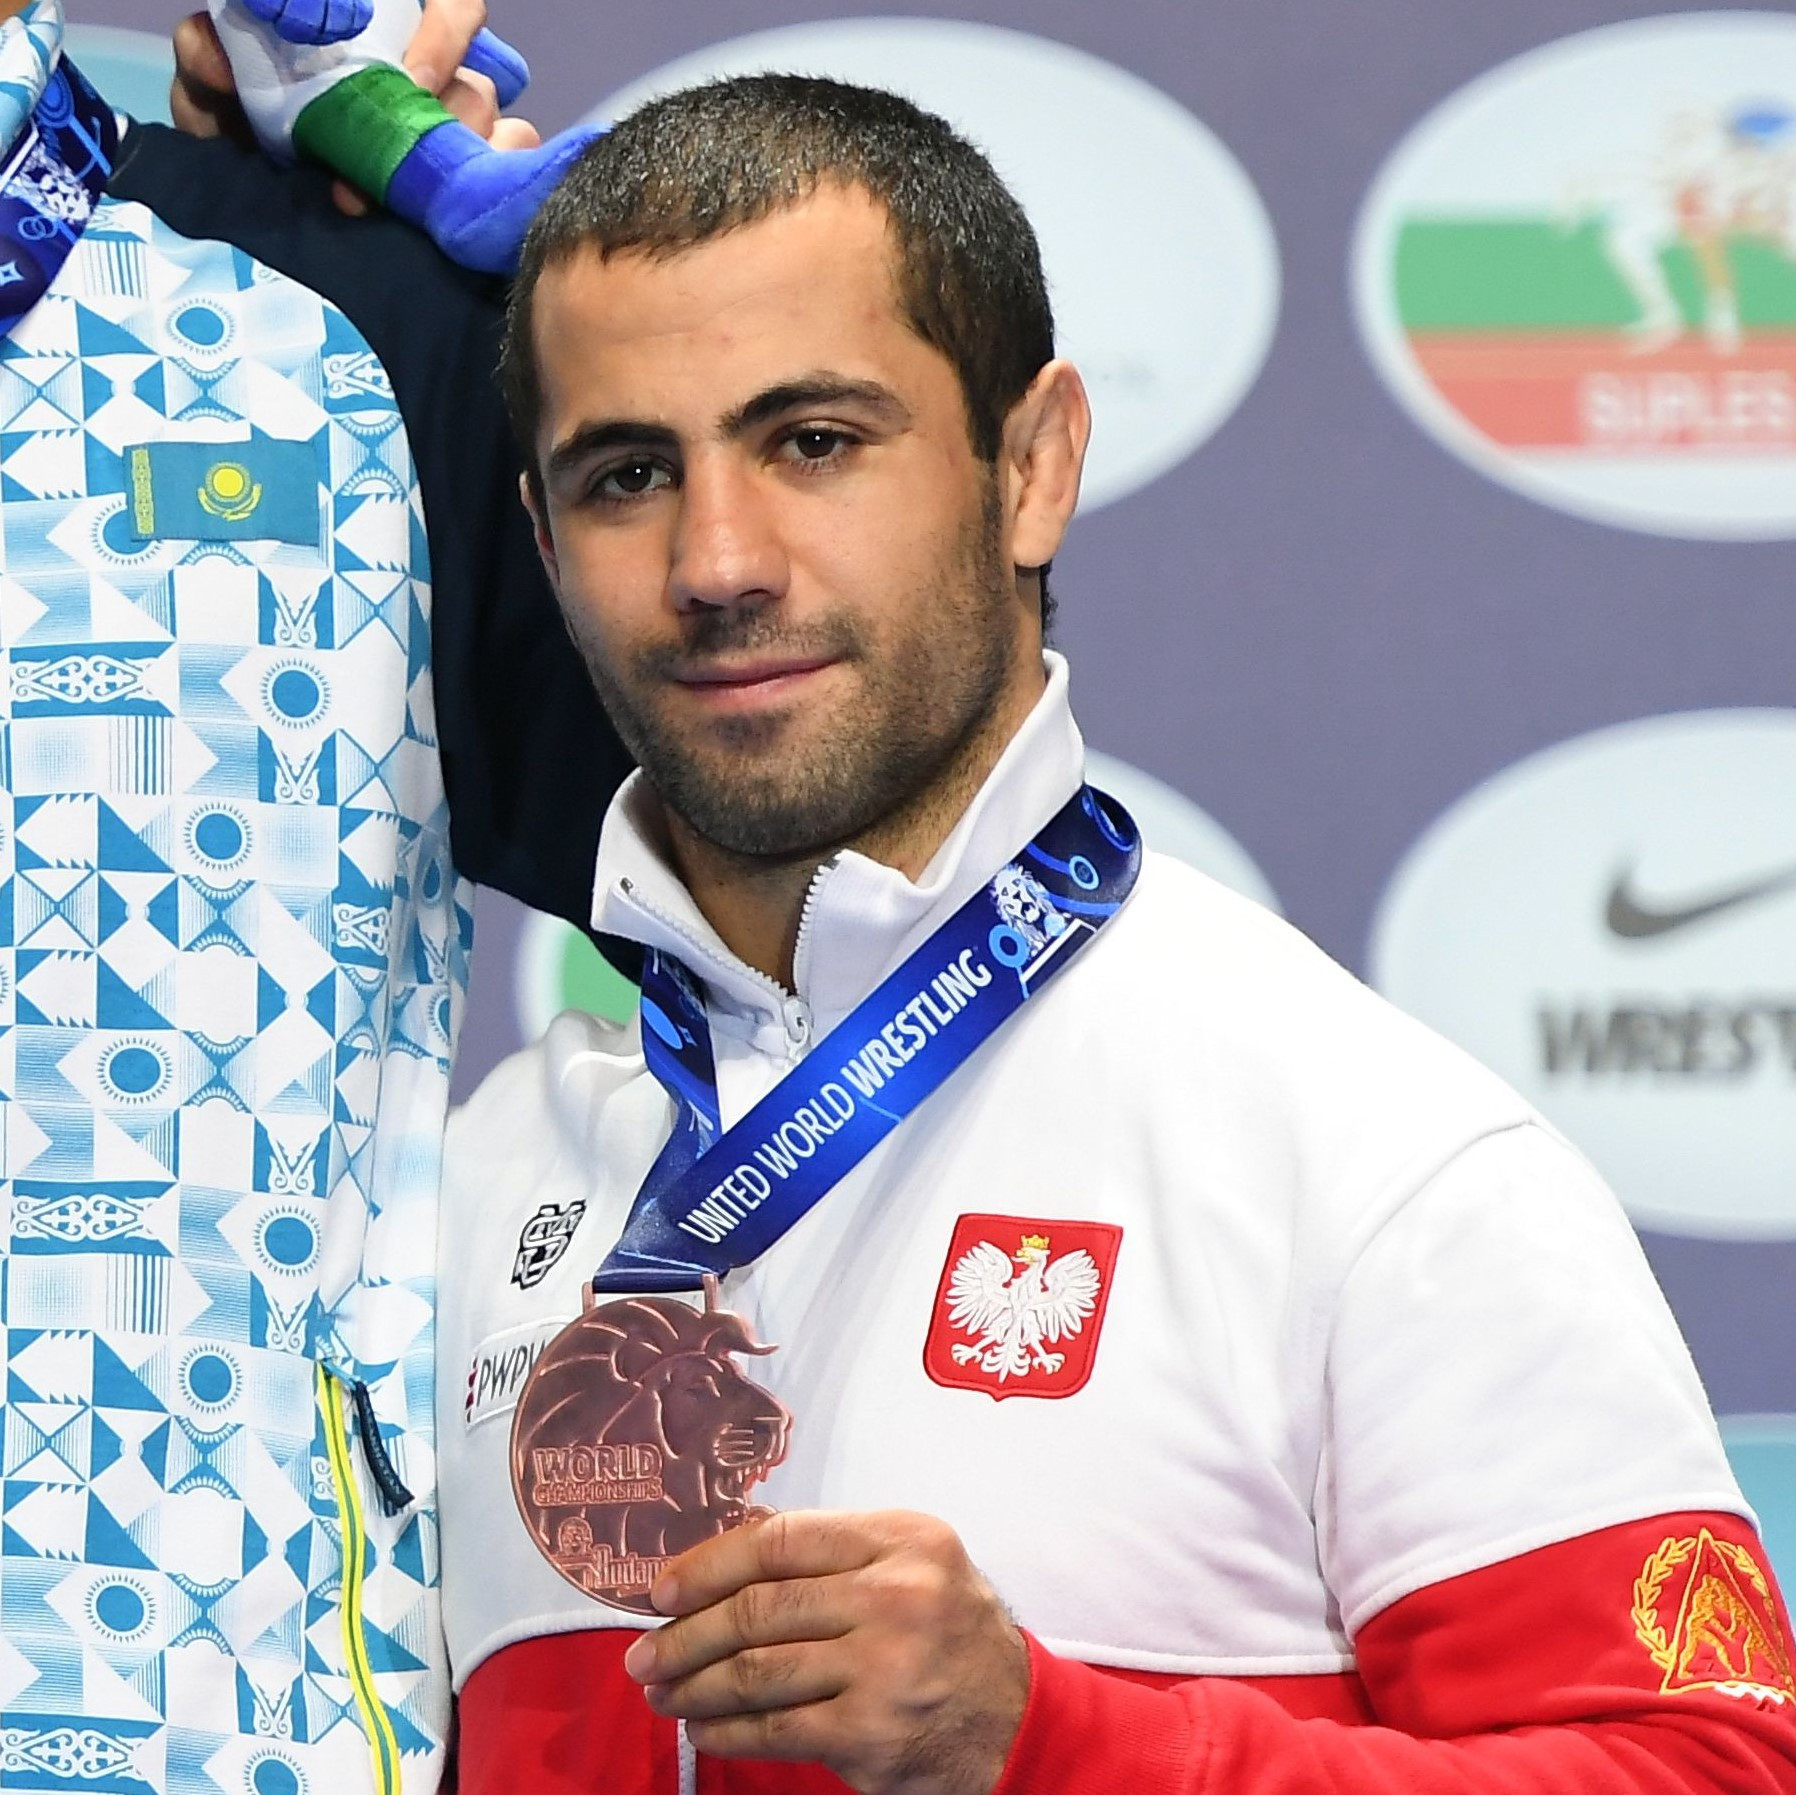 Gevorg Sahakyan, a bronze medallist at the 2018 World Championships, was one of two home winners on the final night of the UWW Poland Open in Warsaw ©Getty Images